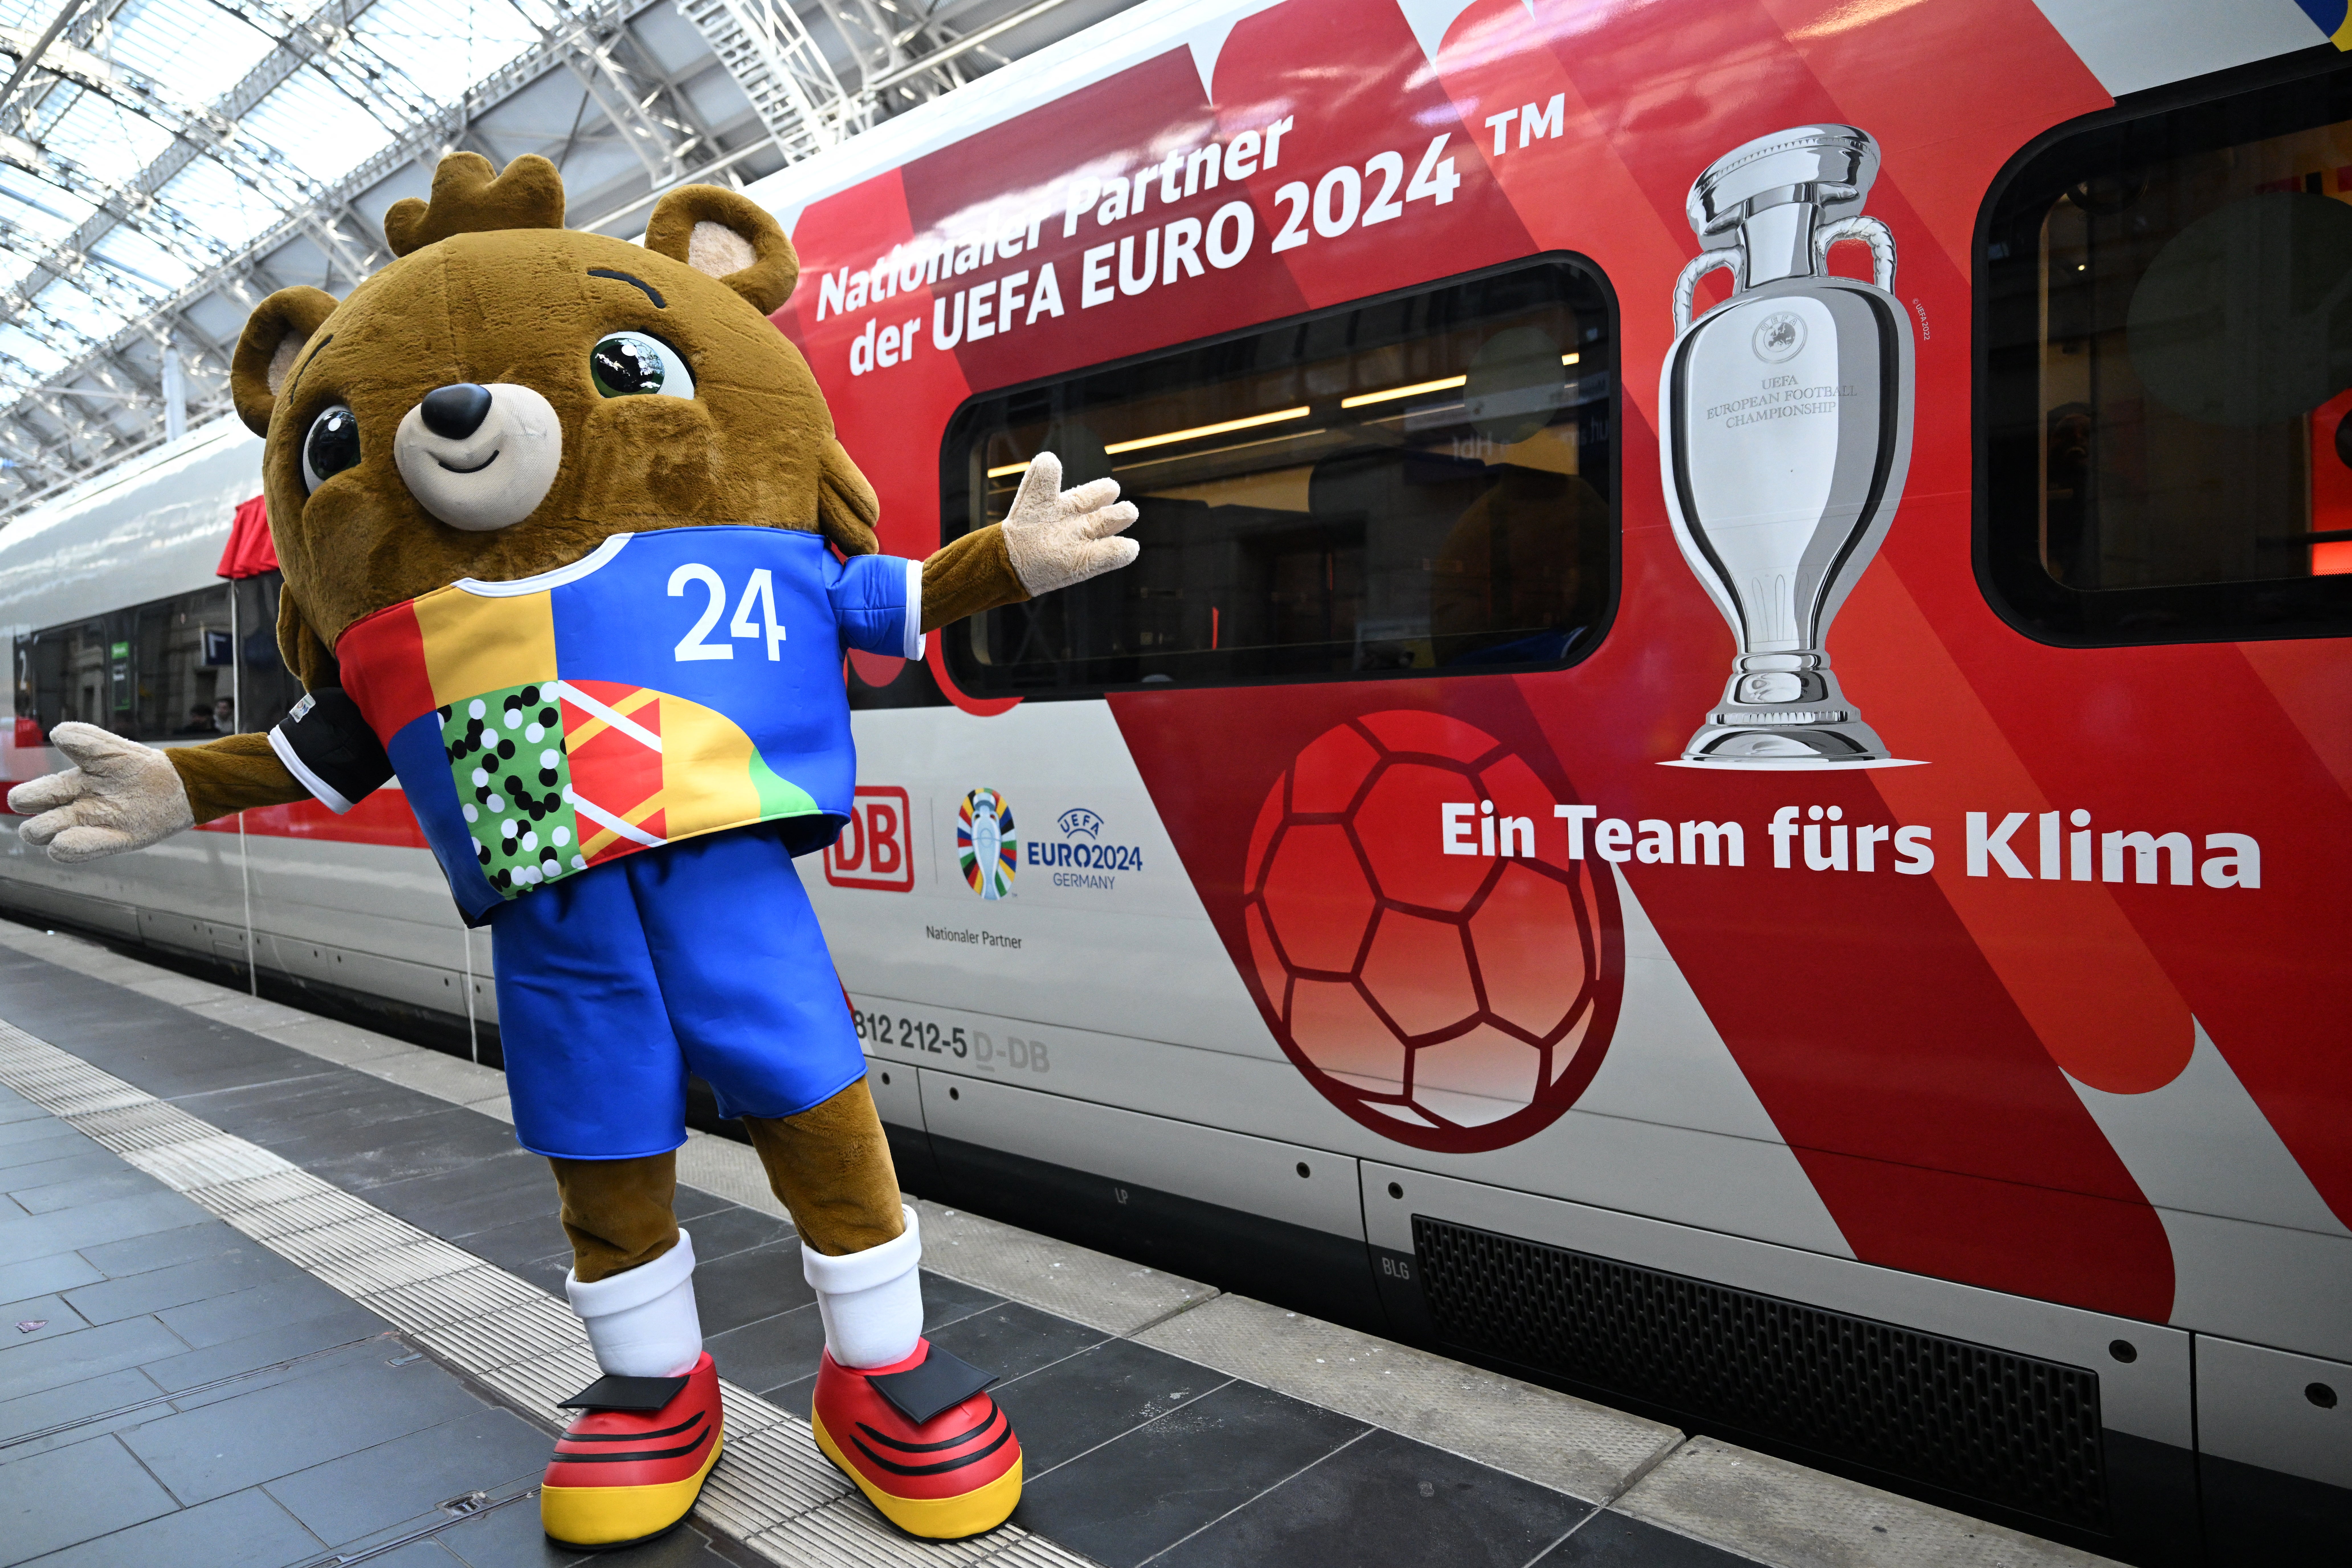 euro 2024, england football team, germany, german efficiency? euro 2024 trains are a shambles - and fans are paying the price